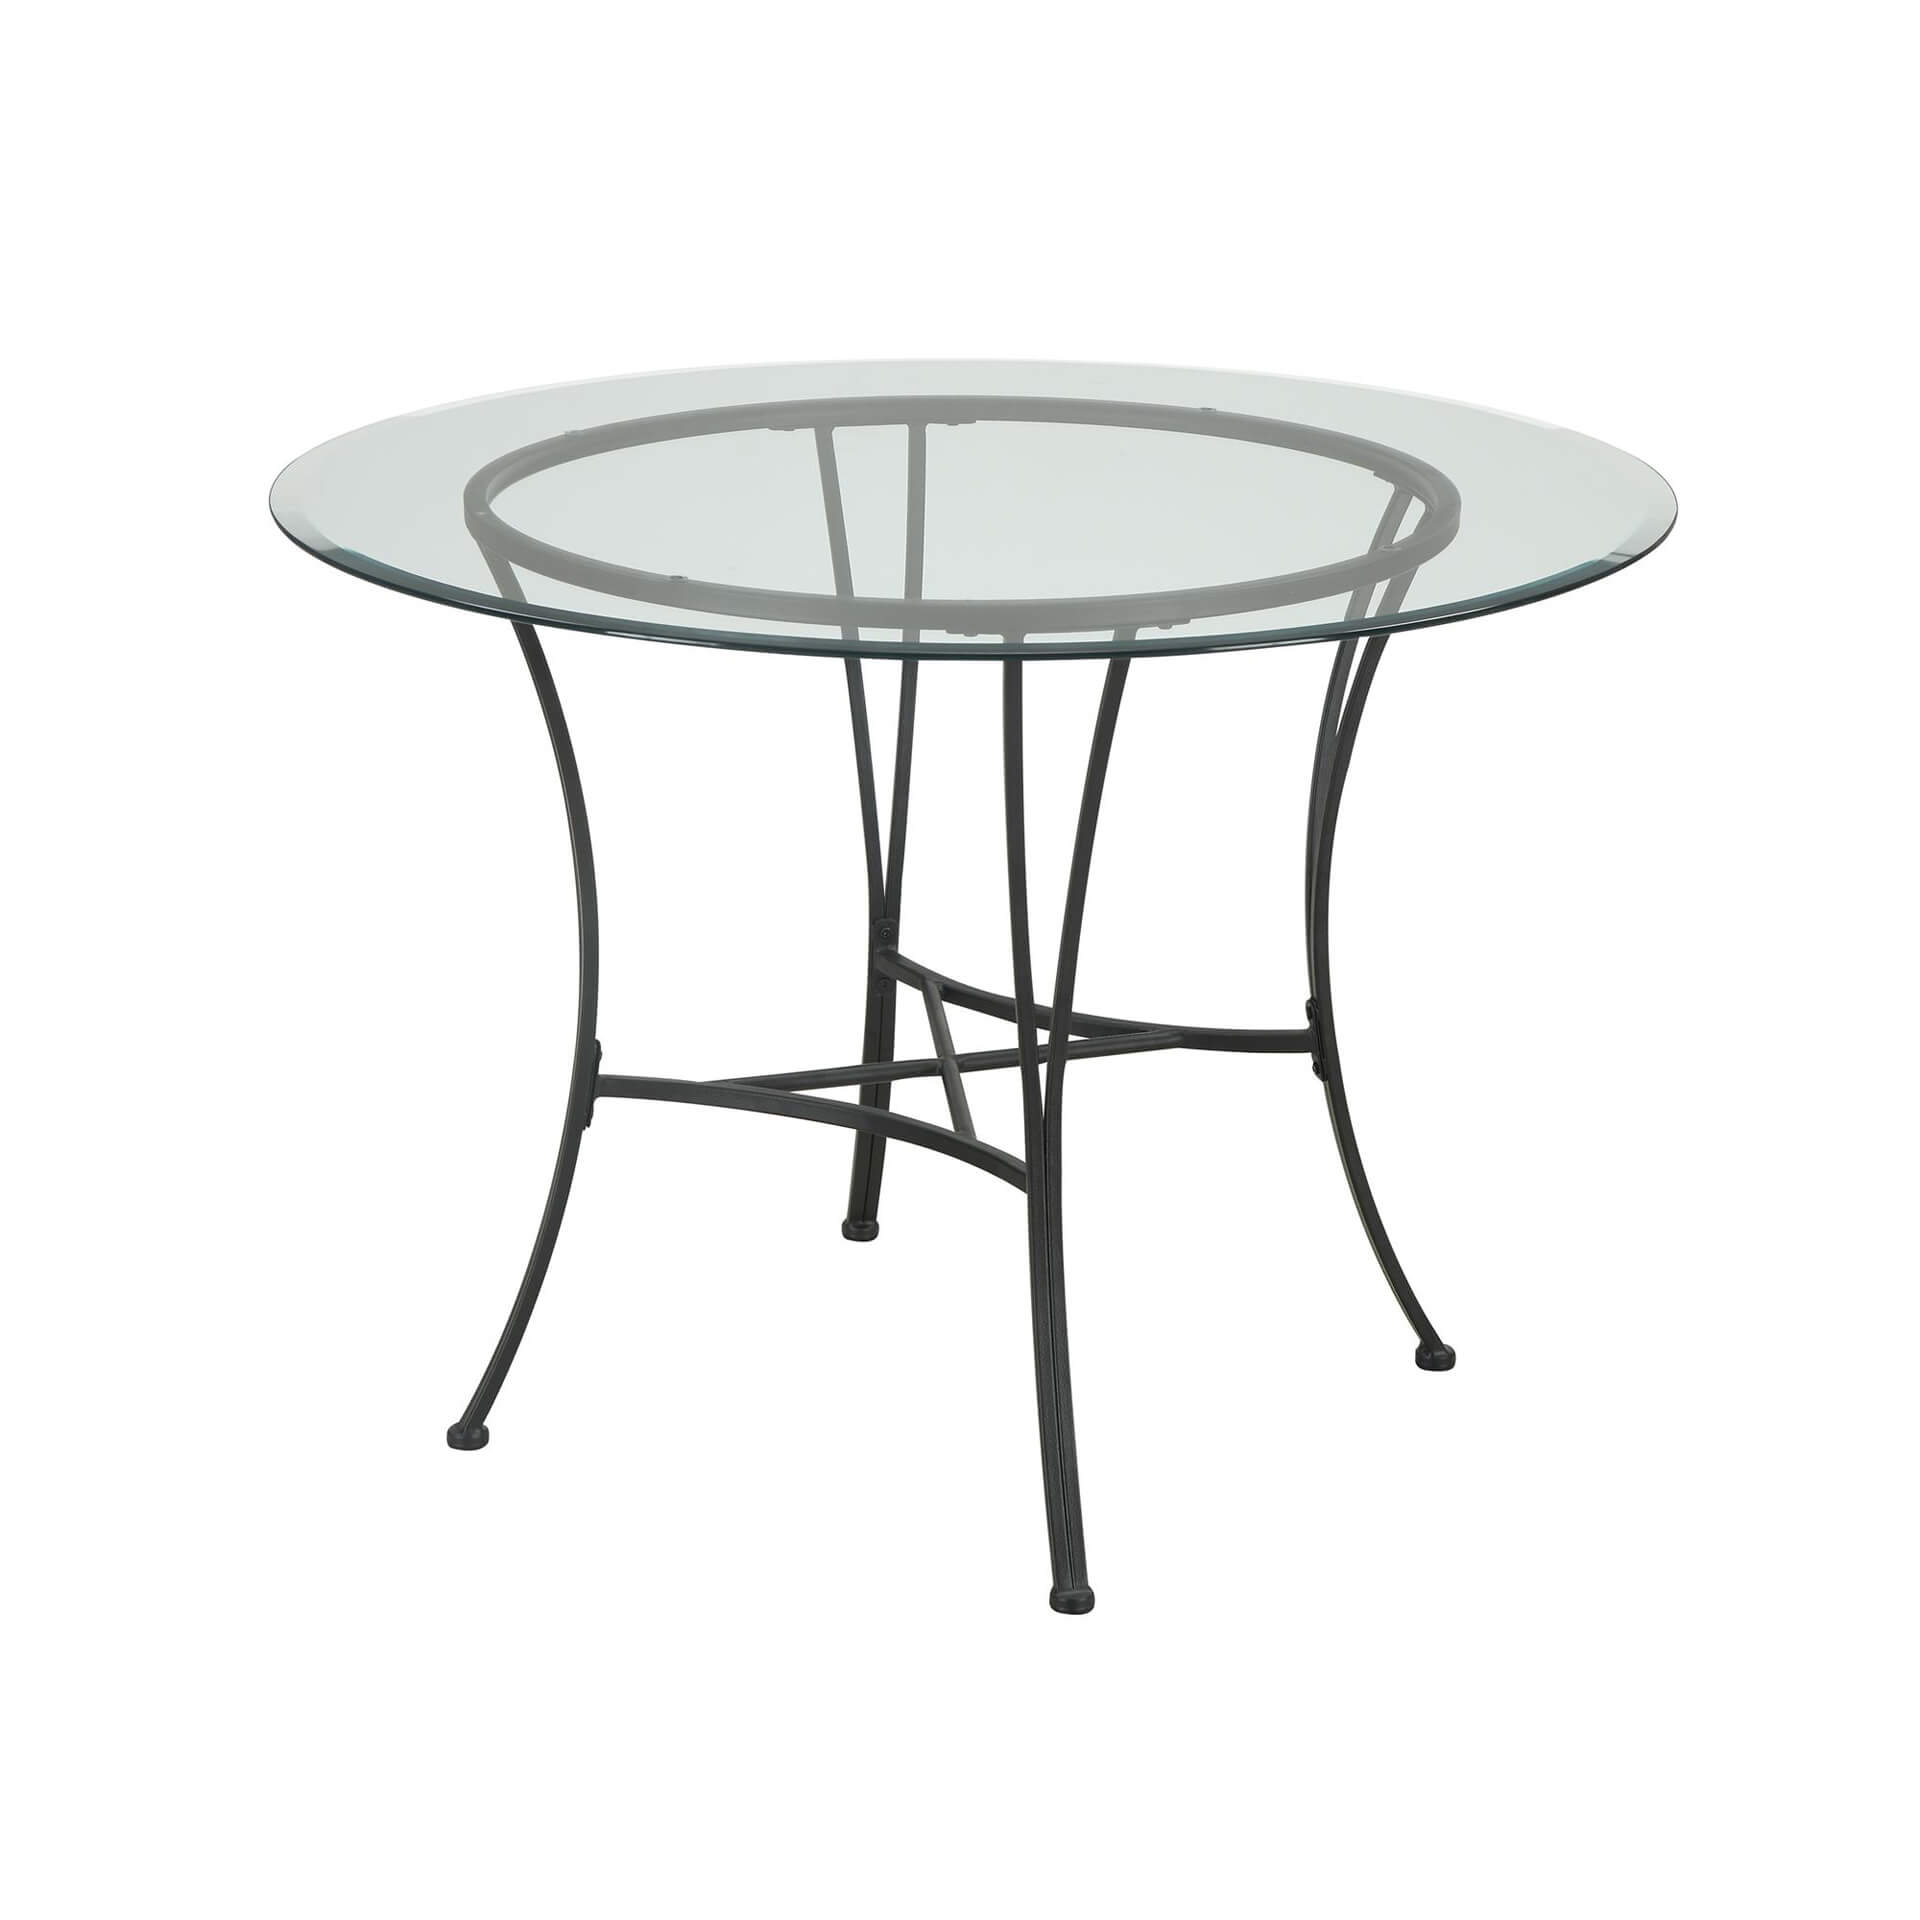 Silo 3D Visualization of Glass Table